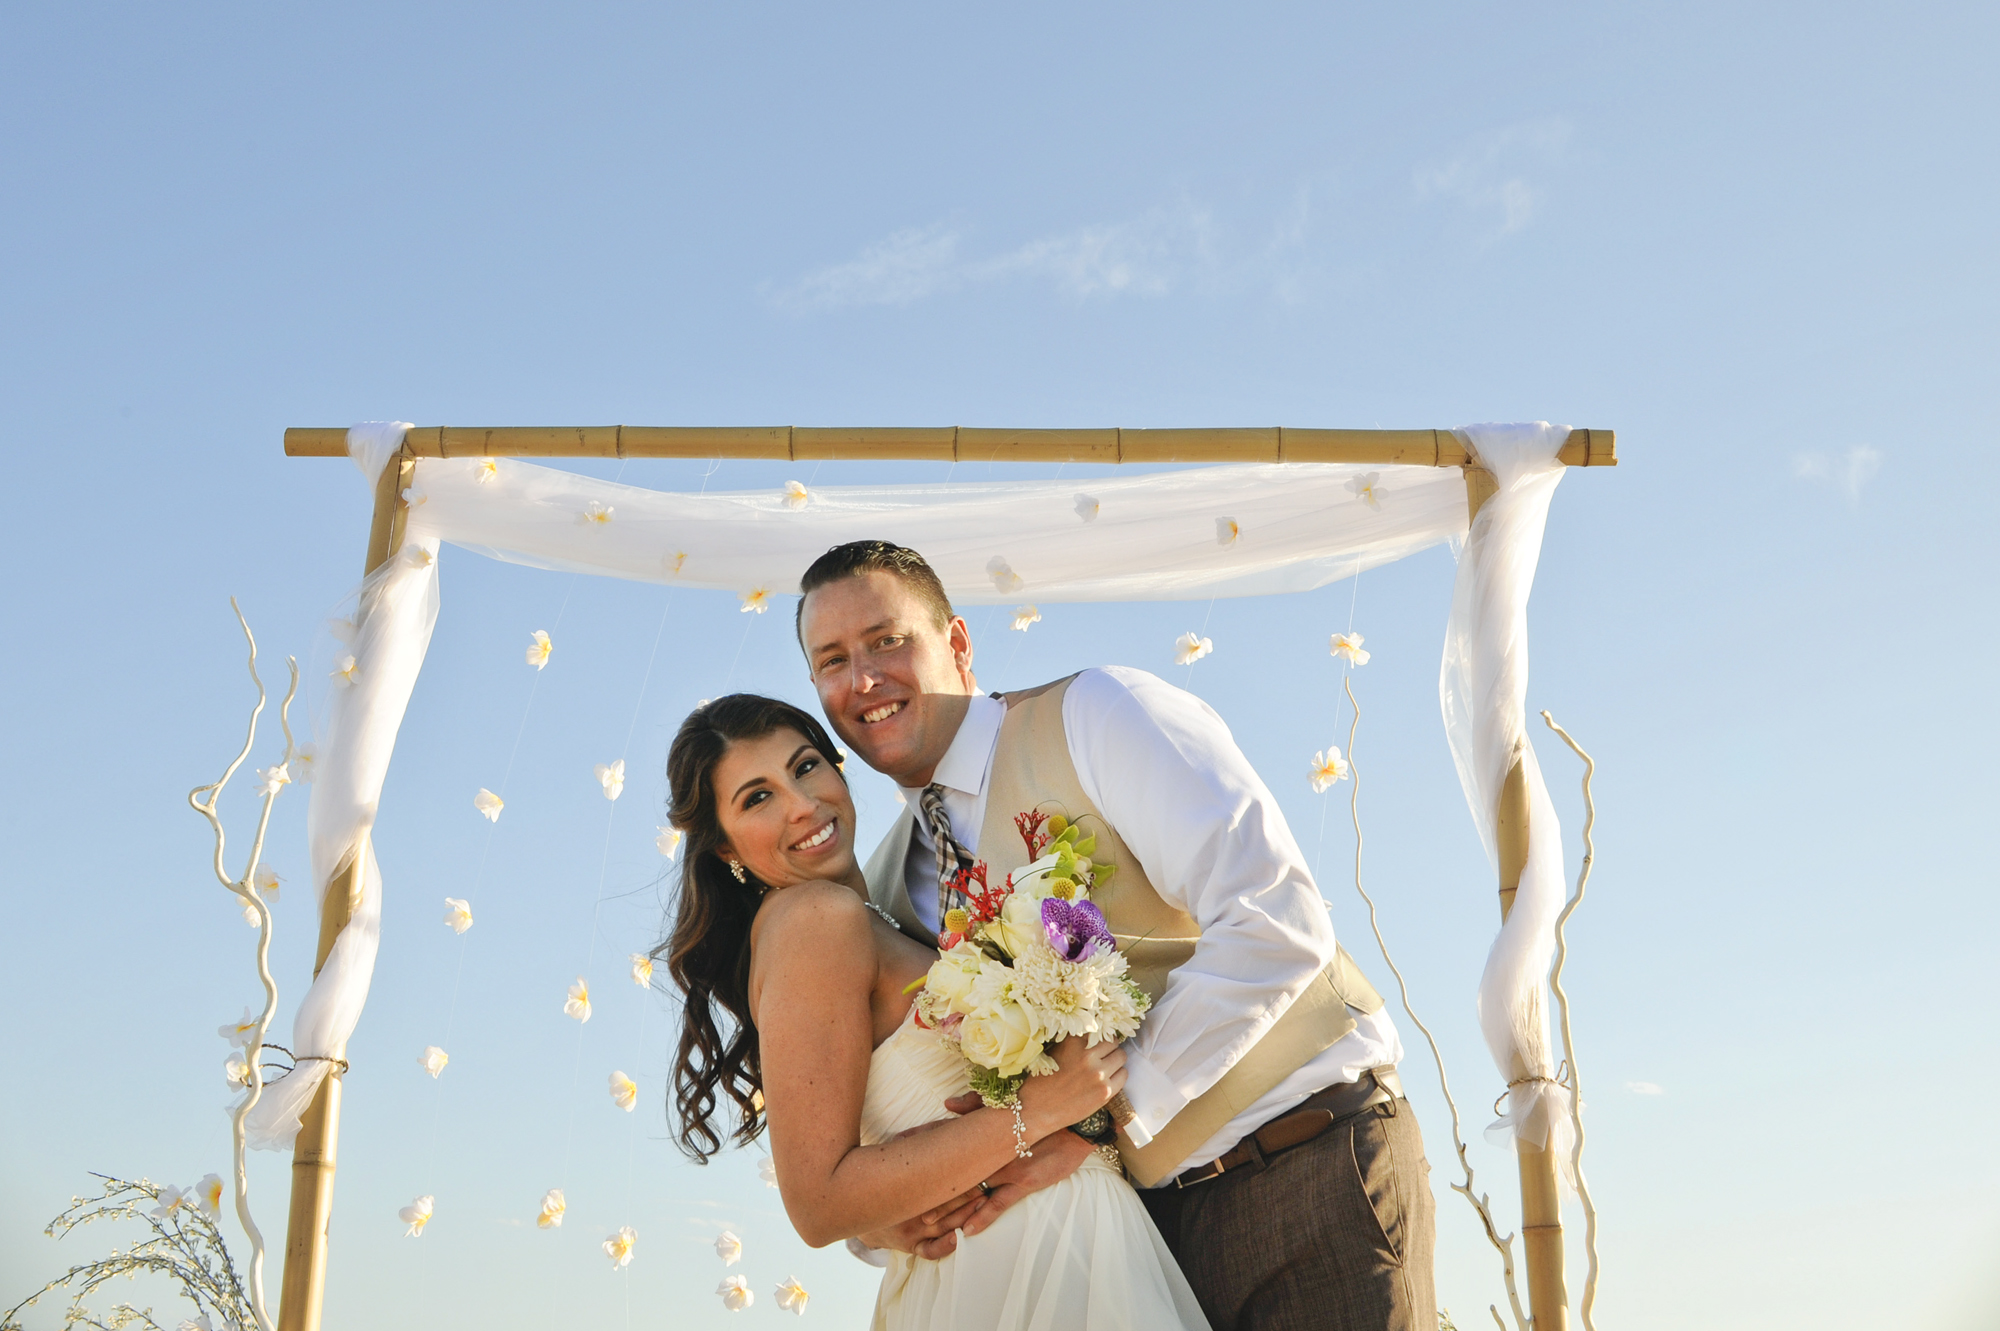 Groom, Russell Thomas, from Costa Mesa, Calif., marries Laura Palacios, from Costa Mesa, Calif., on the sands of Newport Beach, Calif., on May 1, 2015.  After their ceremony they danced all night on the Tiki Boat in the Newport Harbor under a full moon. 